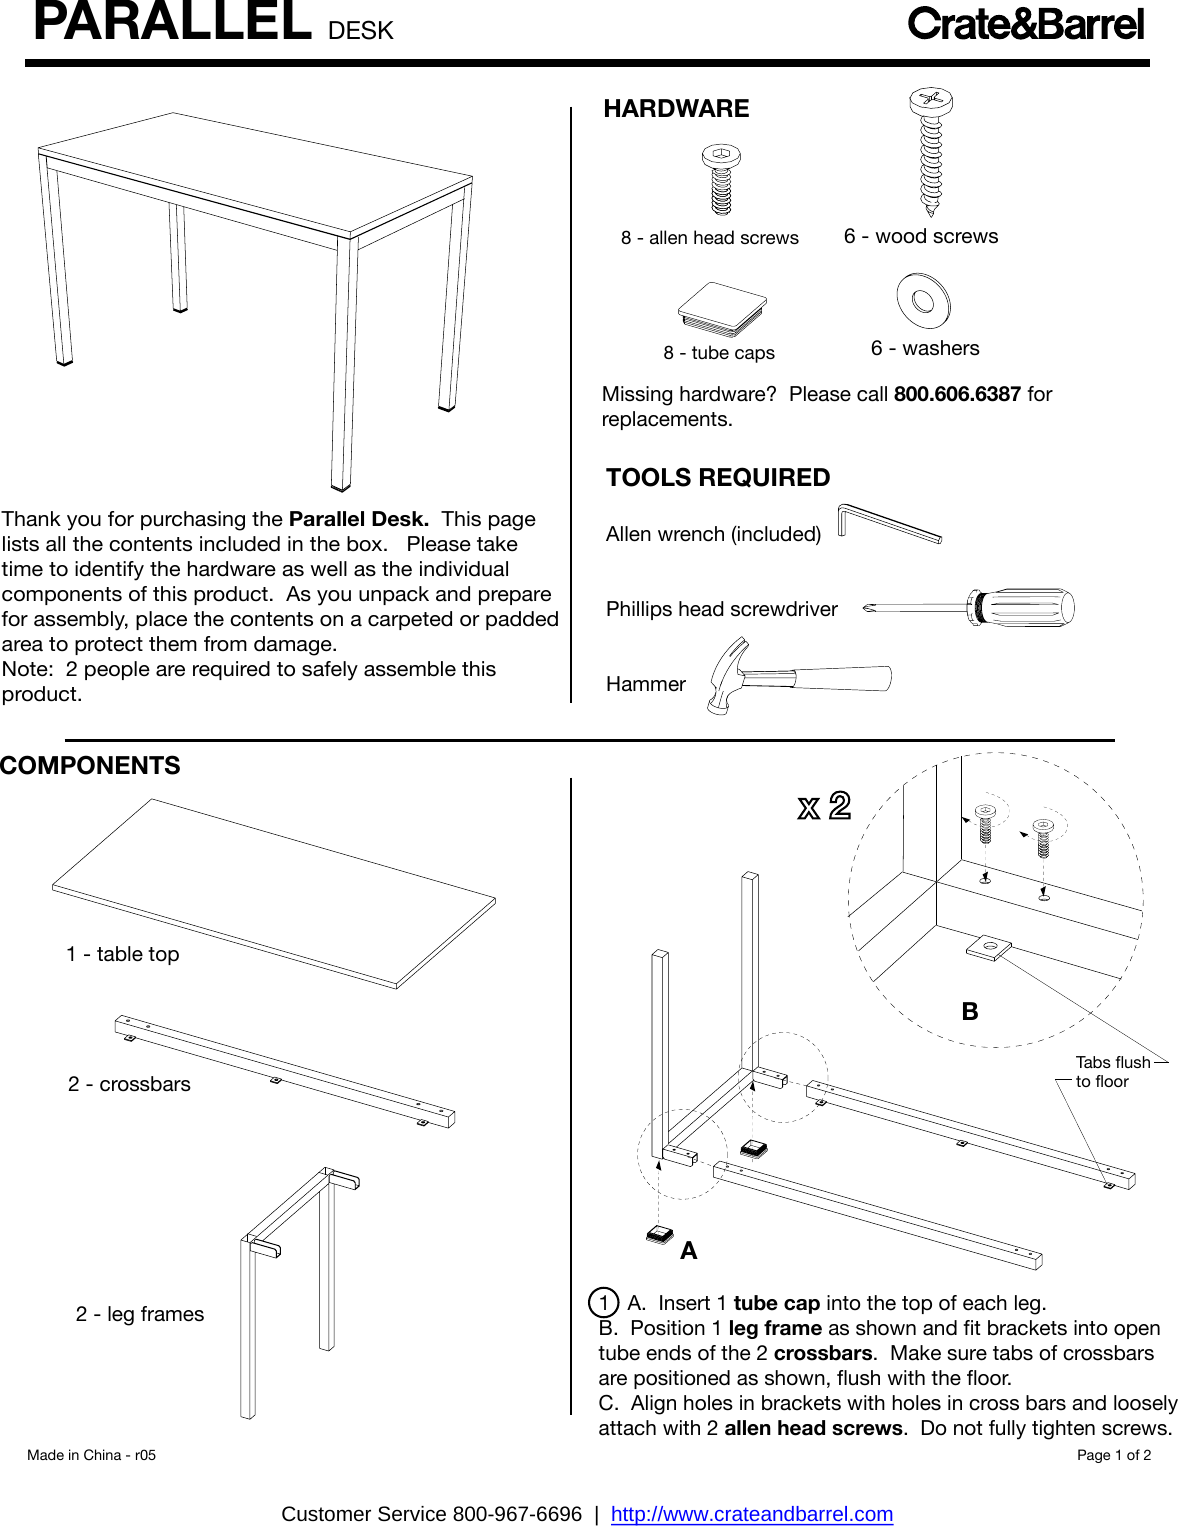 Page 1 of 2 - Crate-Barrel 756-Parallel-Desk Parallel Desk Assembly Instructions From Crate And Barrel